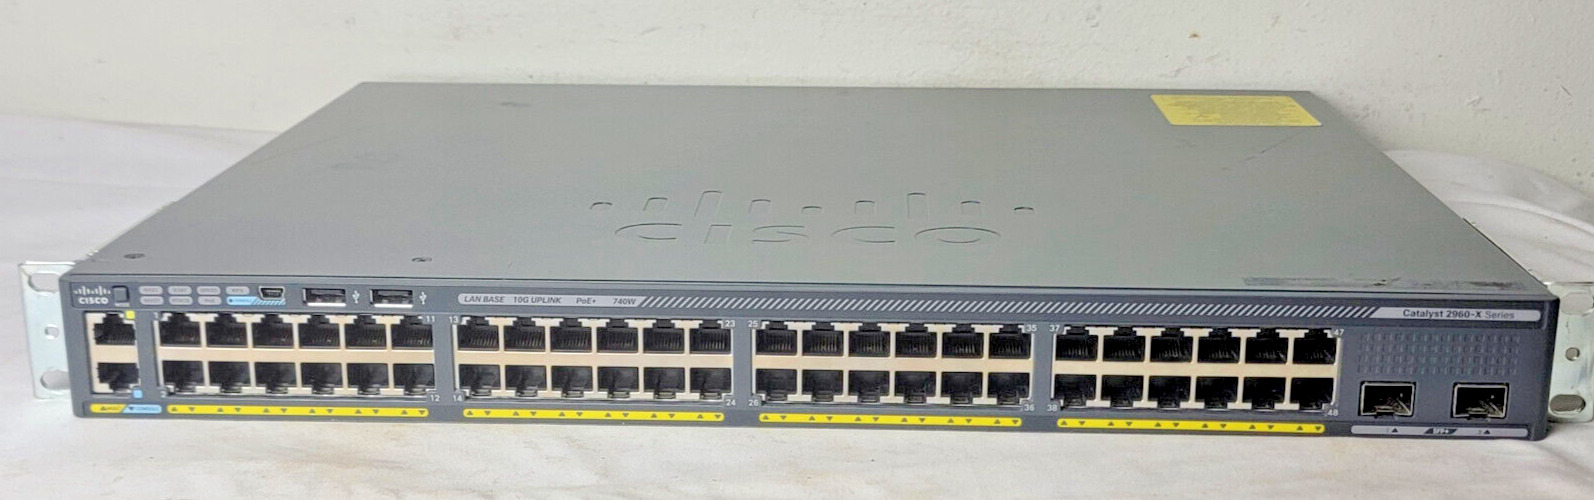 Cisco WS-C2960X-48FPD-L 48 V07 POE+ GE+2 10G SFP+, LAN BASE 740W w/ C2960X-Stack